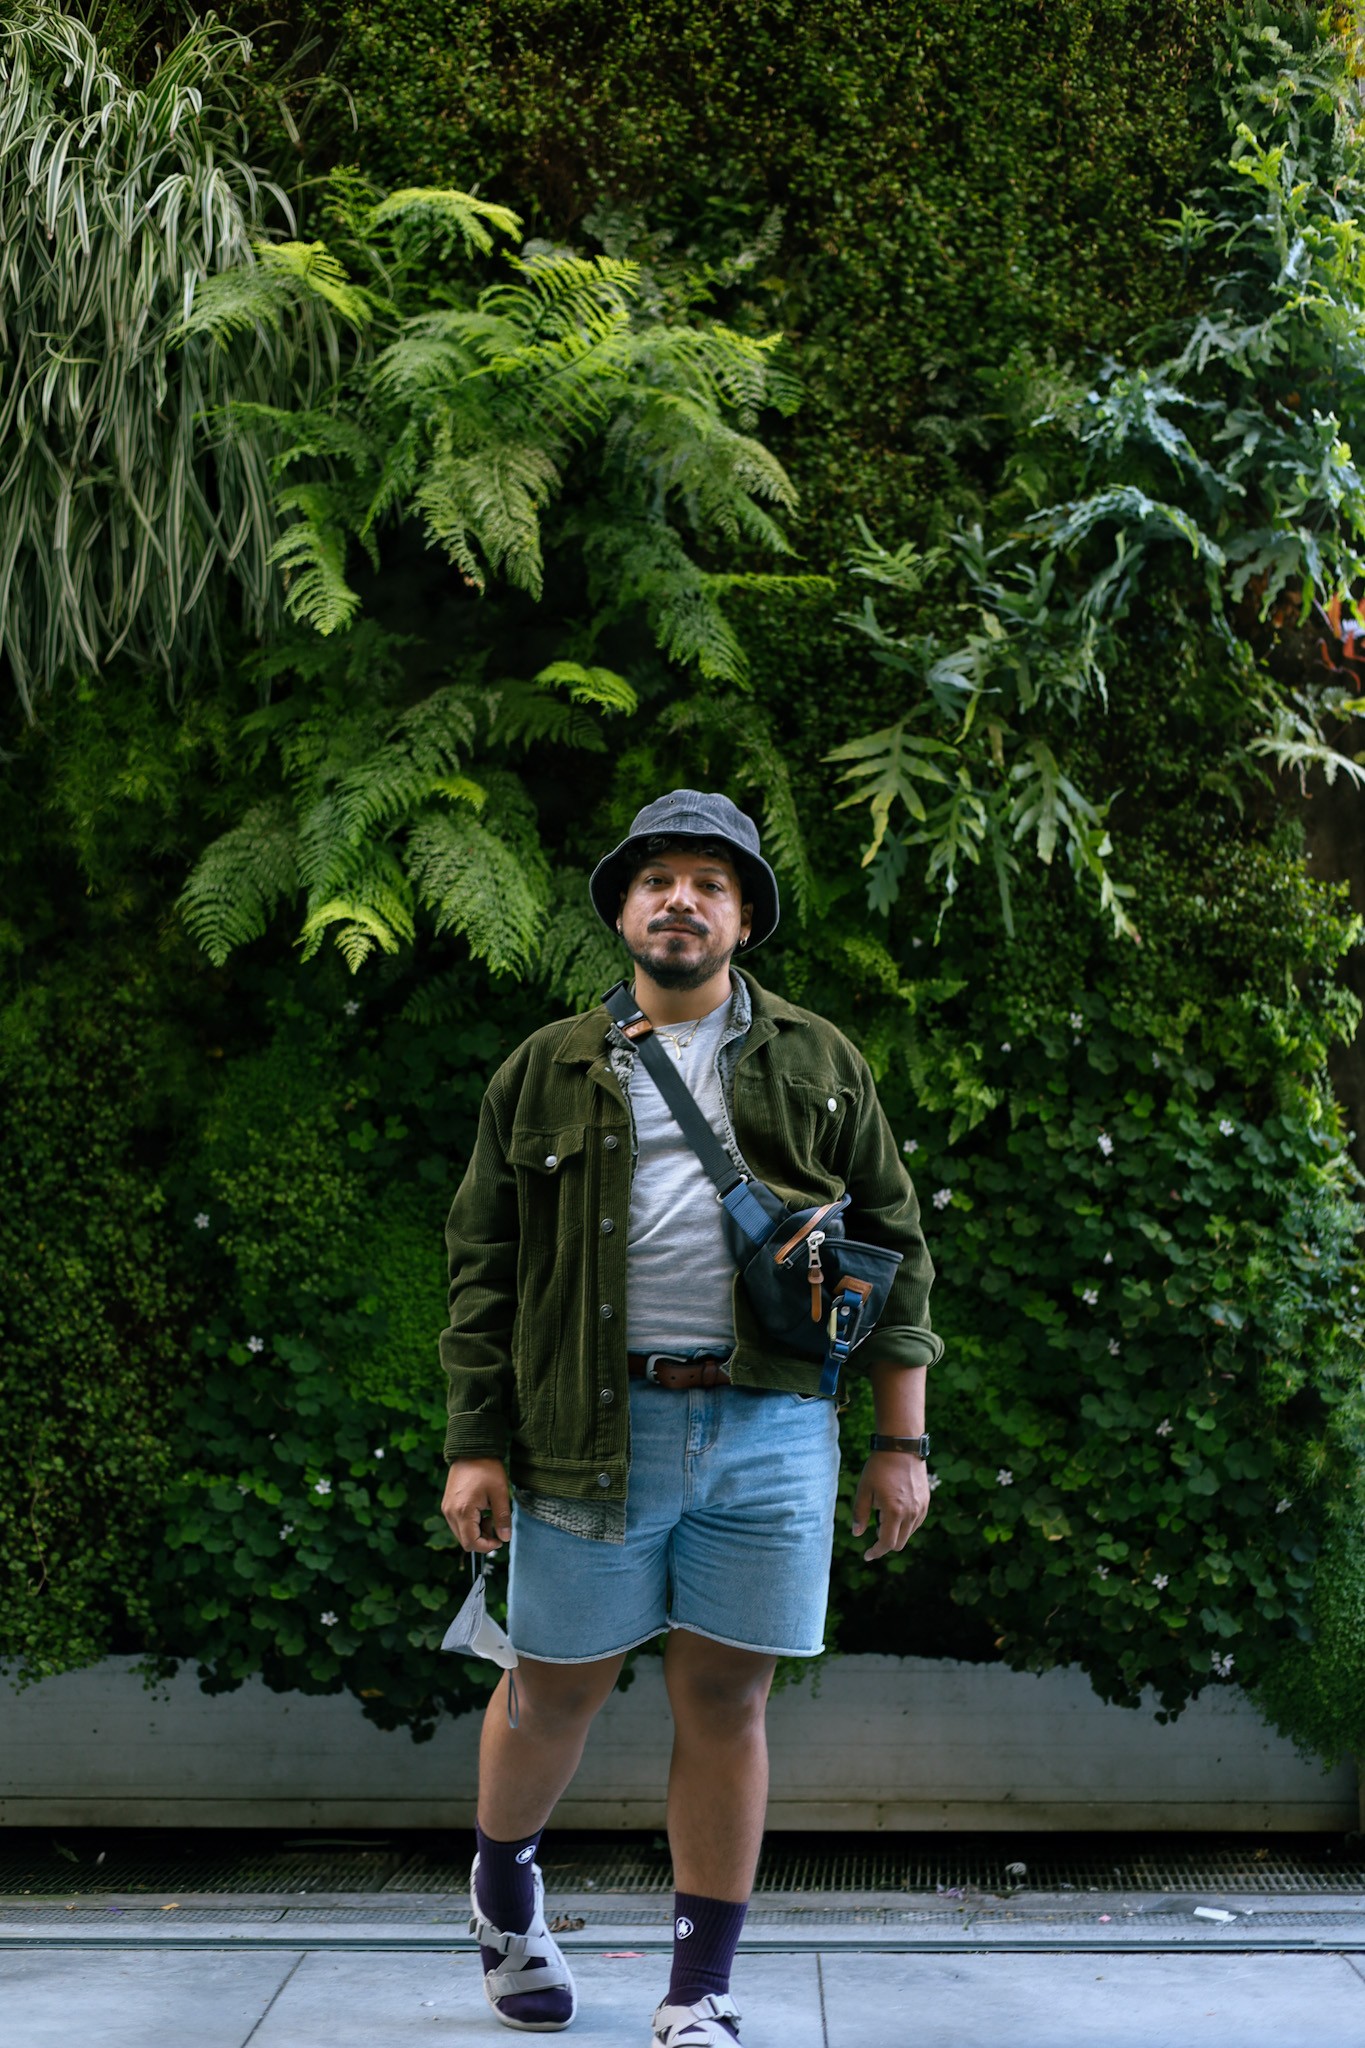 Cristóbal Guerra stands in front of a wall of verdant foliage, looking into the camera, wearing a blue bucket hat